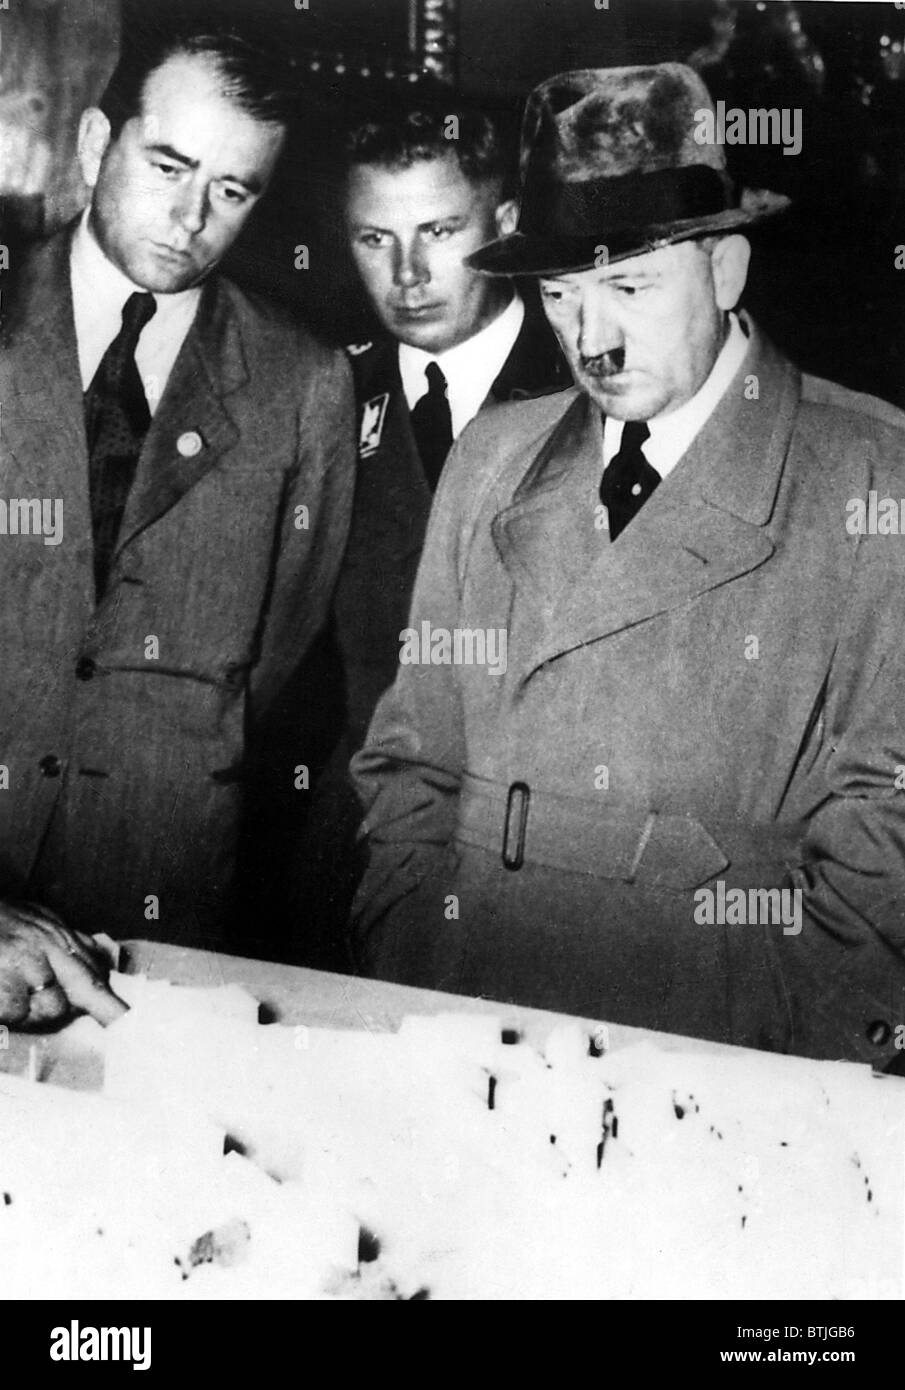 ADOLF HITLER (R), and ALBERT SPEER (L), examine an architectural model, during WWII, 1940s. Everett/CSU Archives. Stock Photo